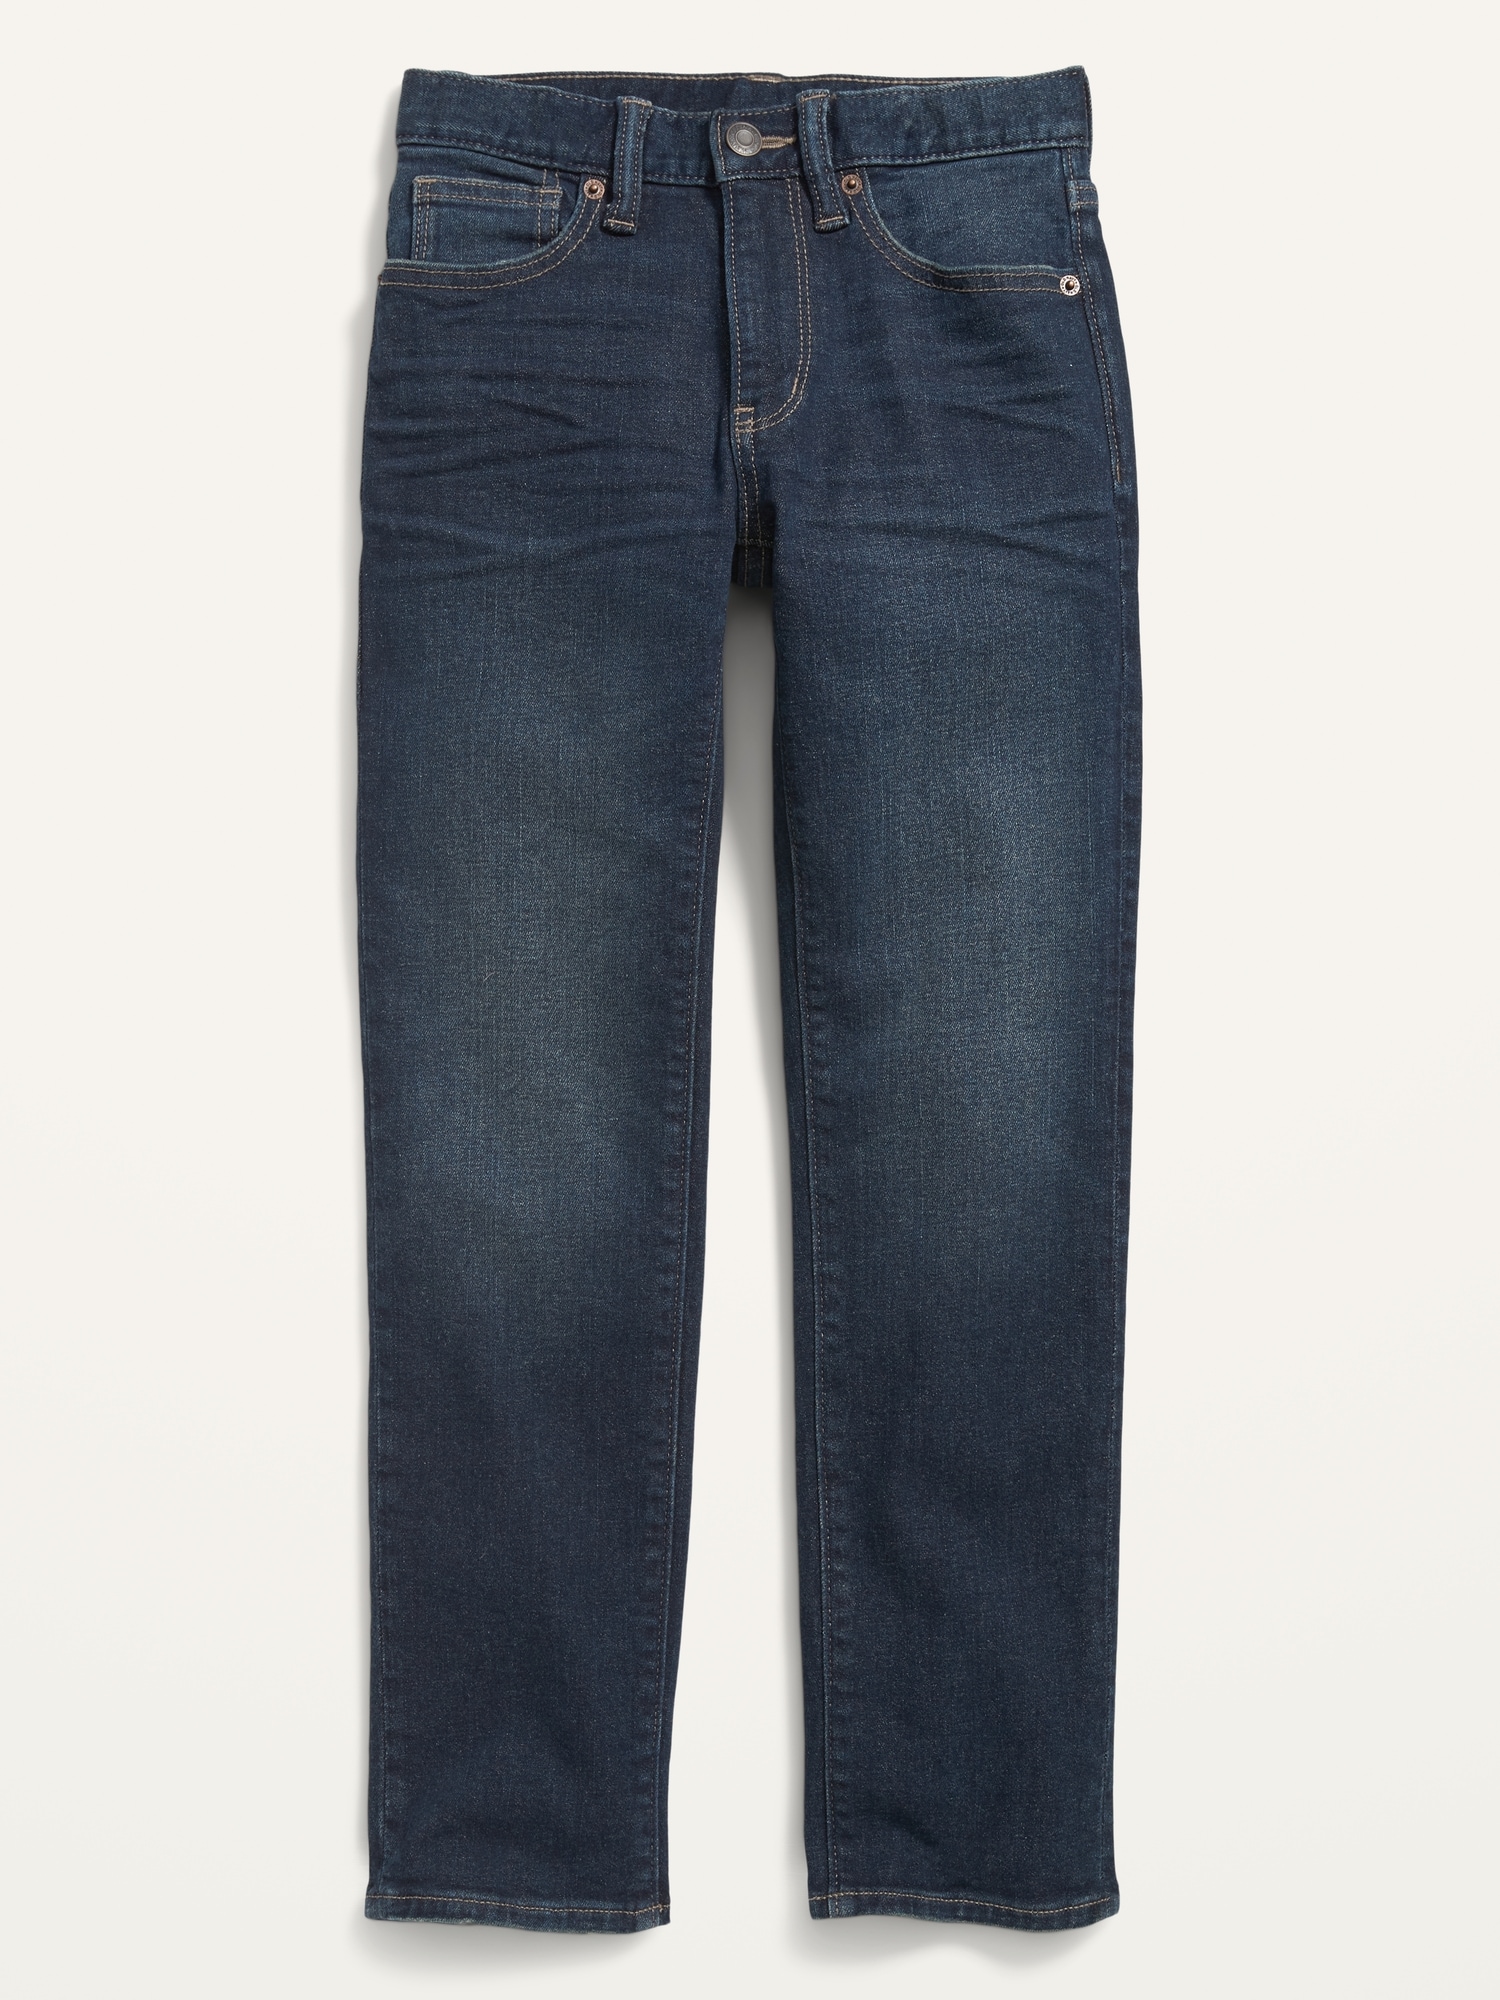 Skinny for Jeans Boys Navy Old |